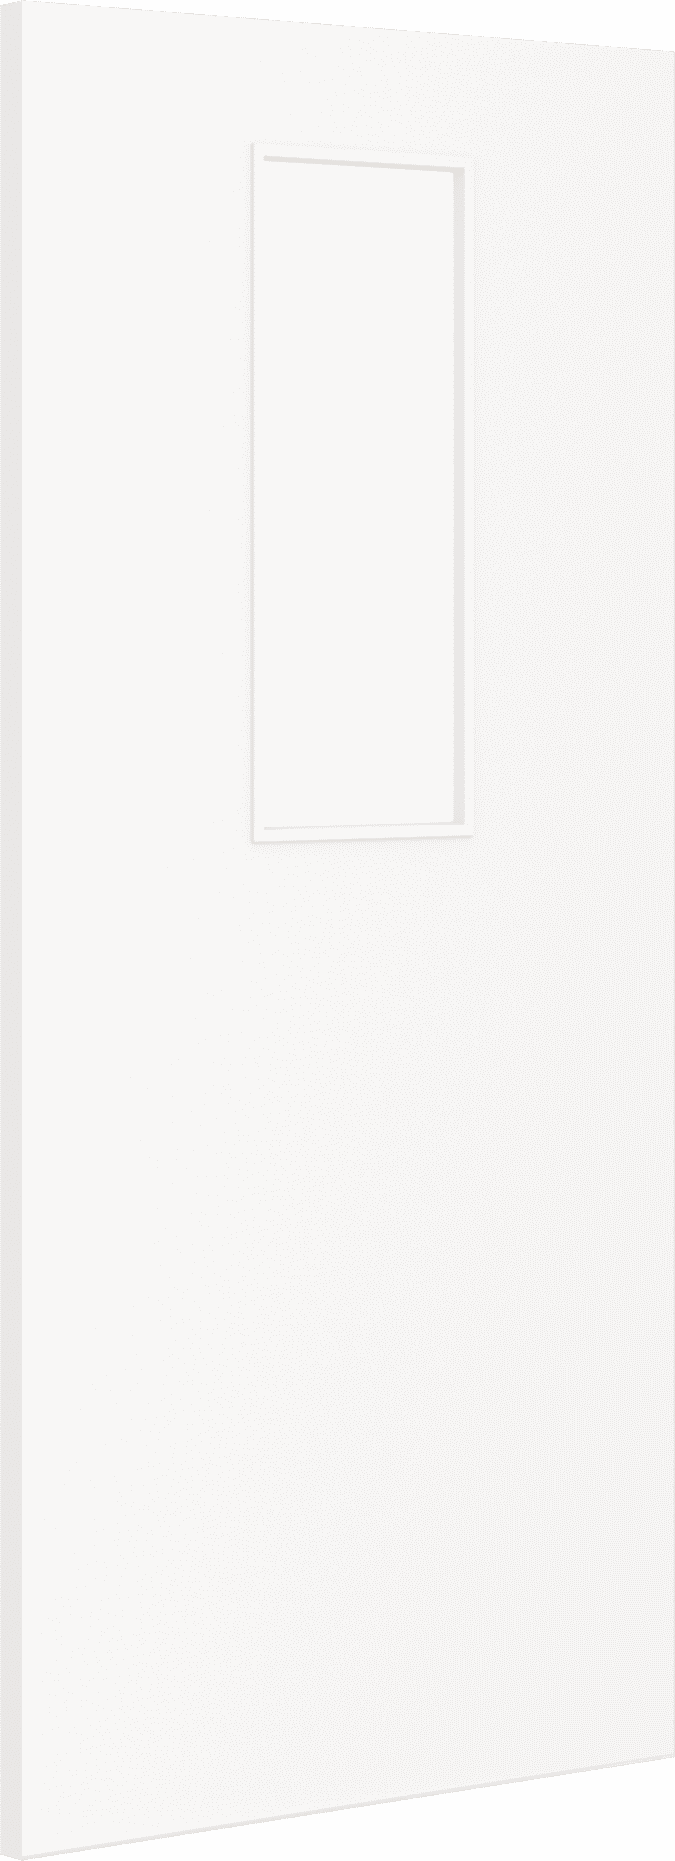 1981mm x 533mm x 44mm (21") Architectural Paint Grade White 14 Frosted Glazed Fire Door Blank